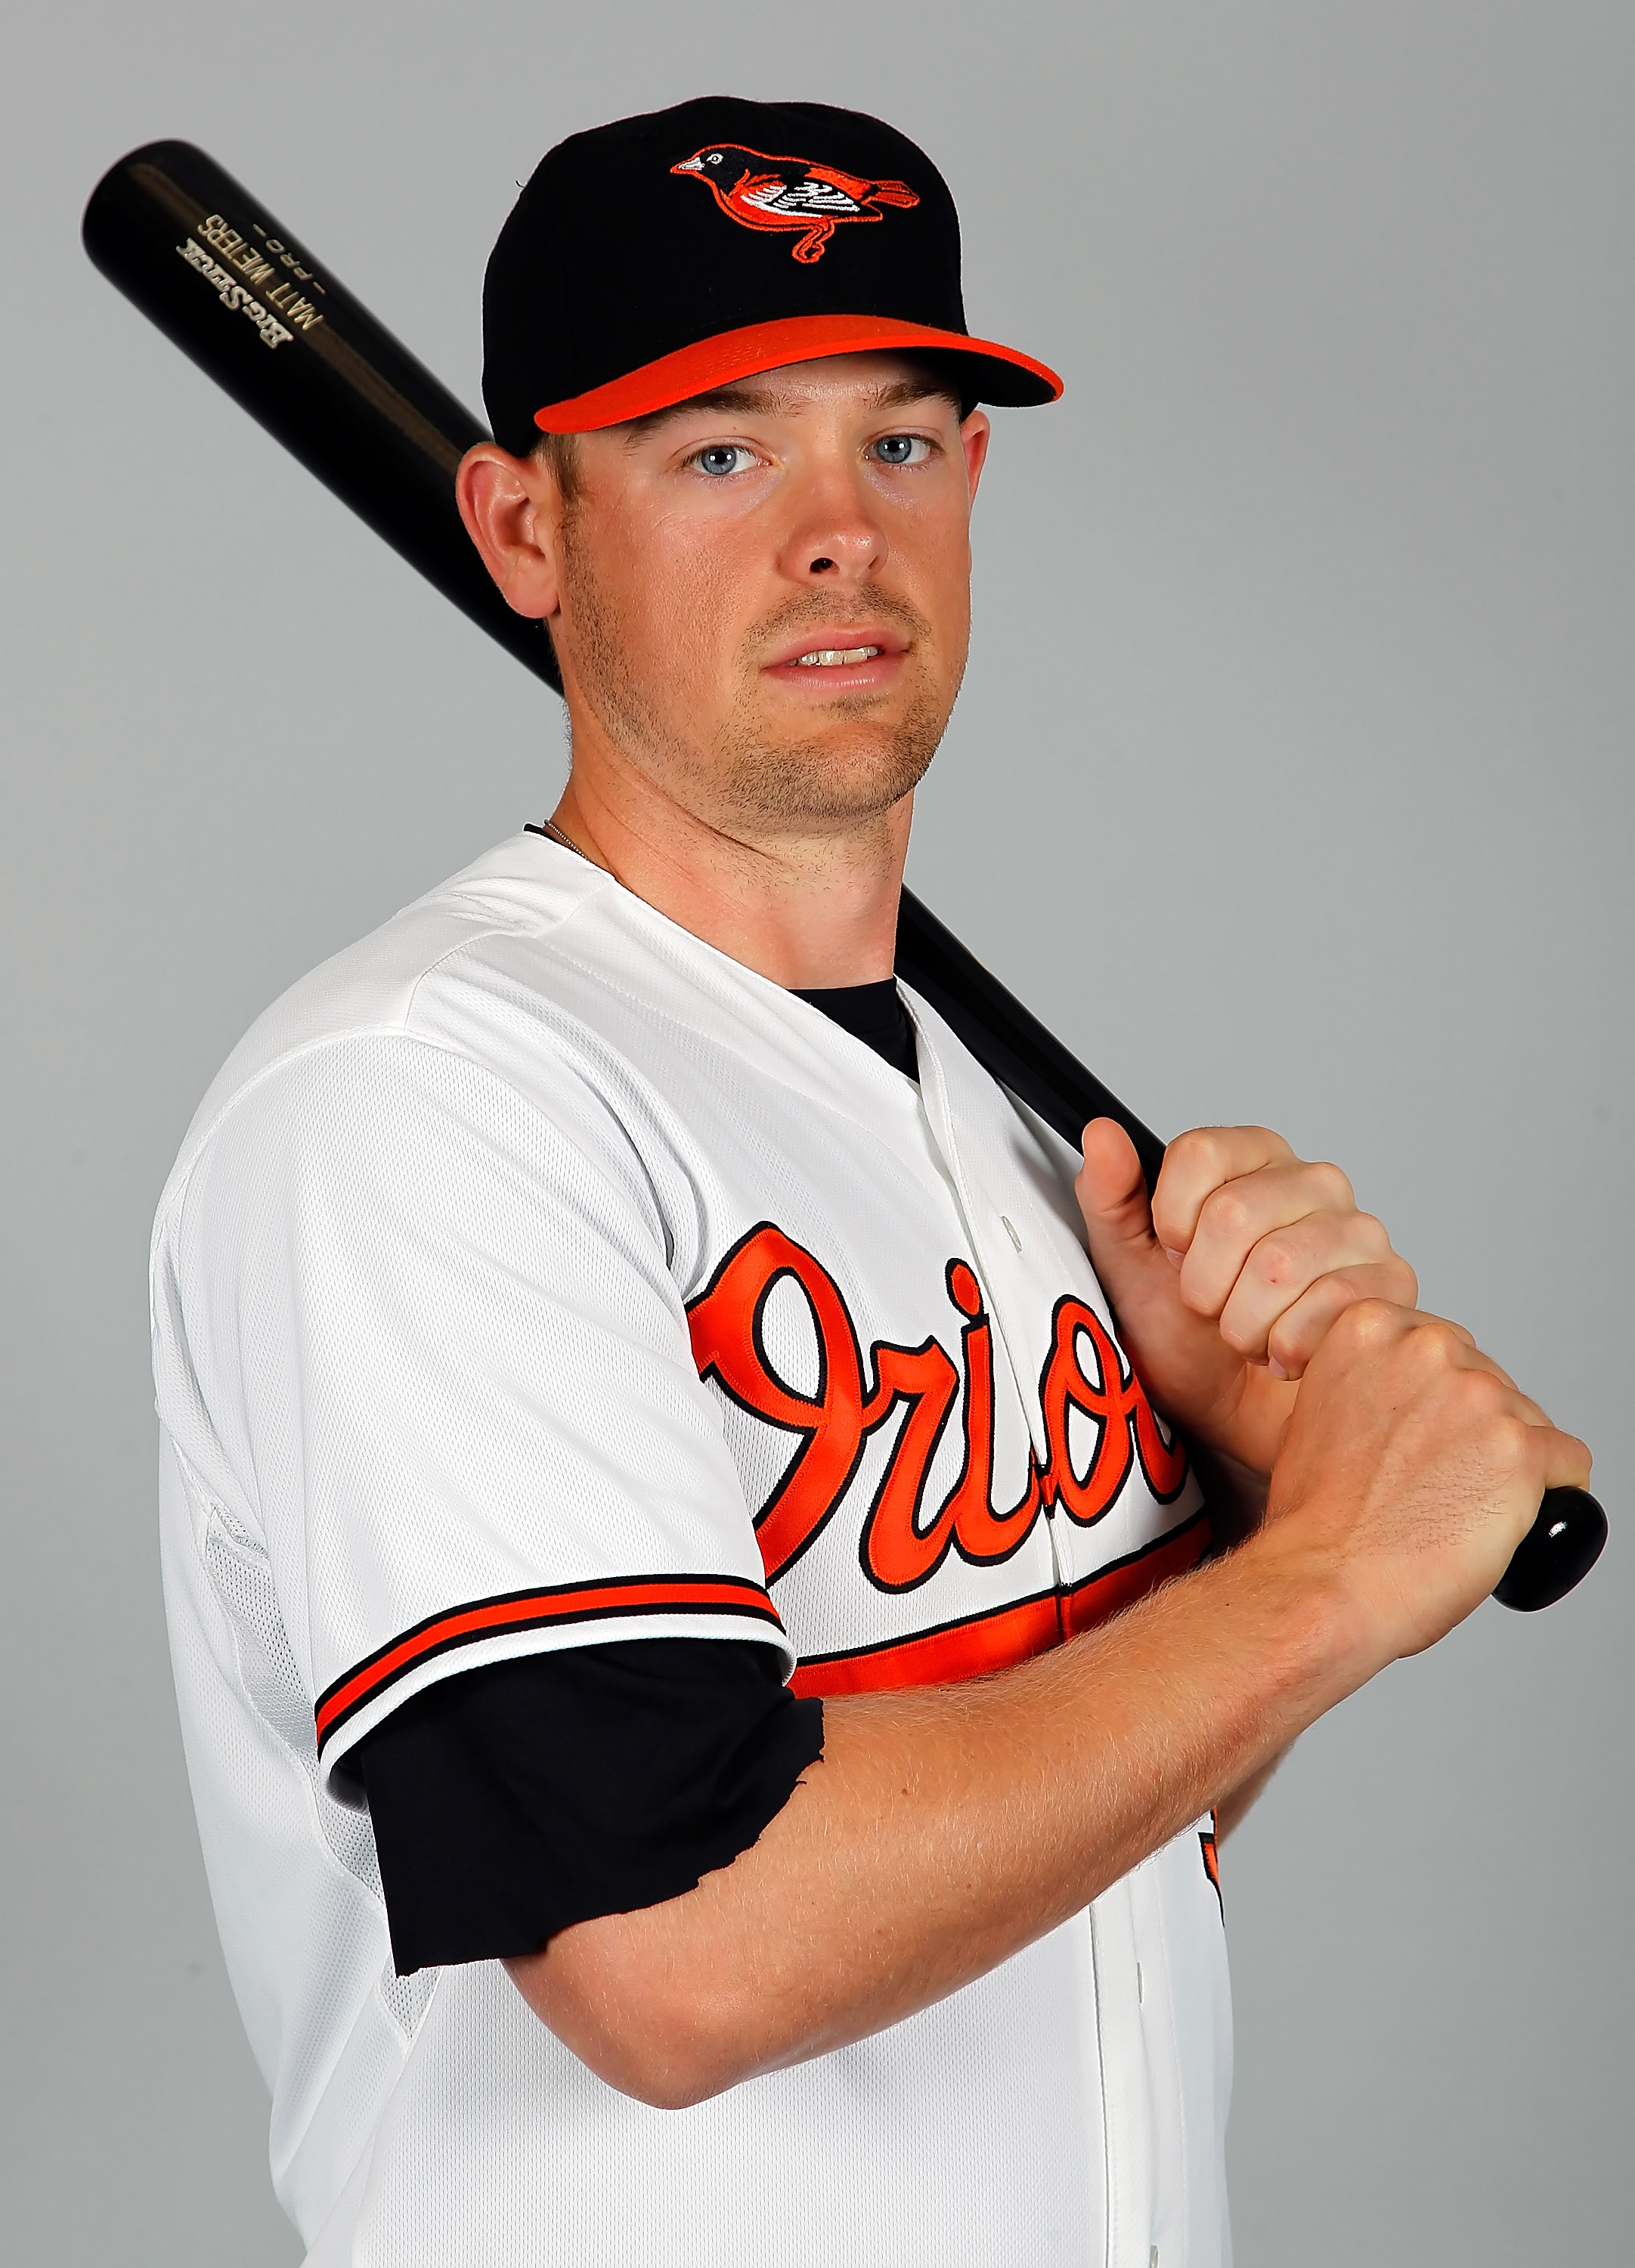 Former Orioles catcher Matt Wieters at Nationals camp, expected to